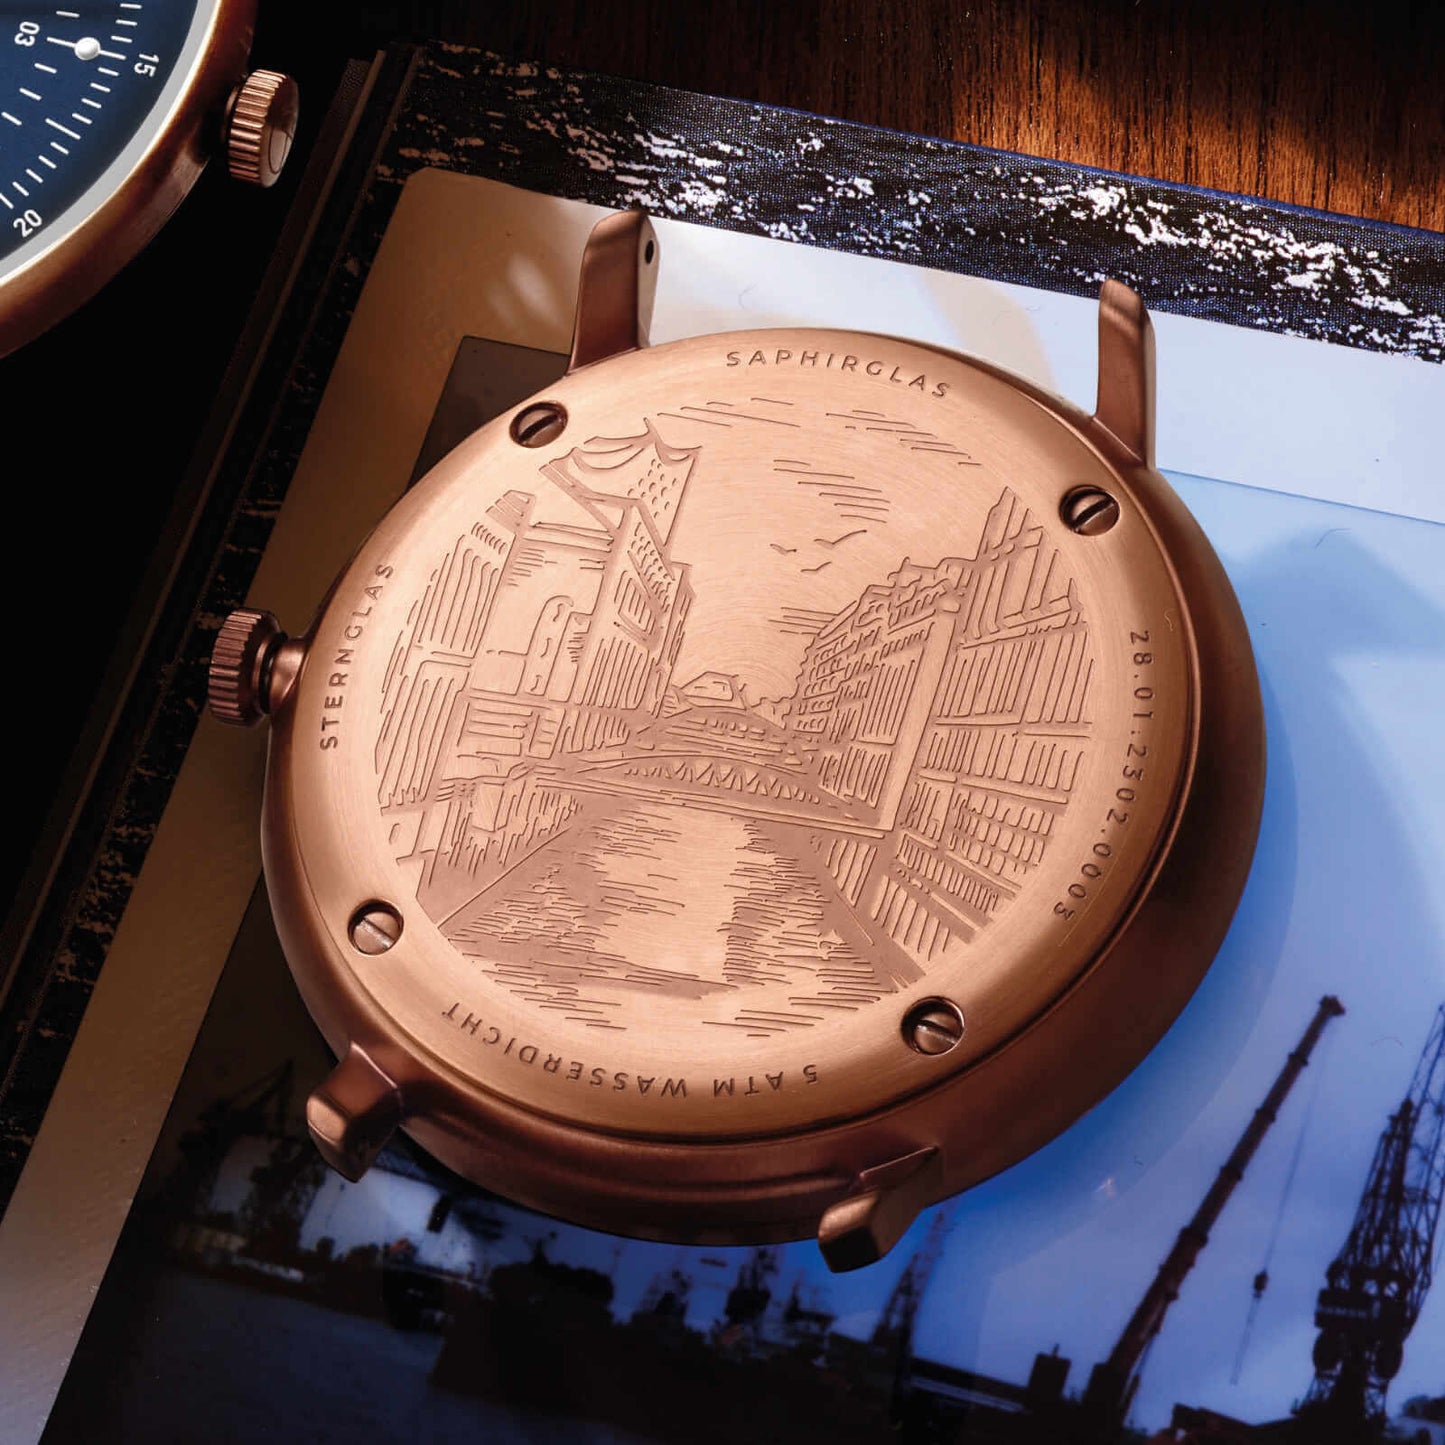 popup|Engraving "Speicherstadt" on the back|A real eye-catcher can be found on the 4-fold screwed back: The engraving of the Speicherstadt with the imposing bridges and the famous Elbphilharmonie in the background captures the spirit of the past and creates a link between tradition and modernity.